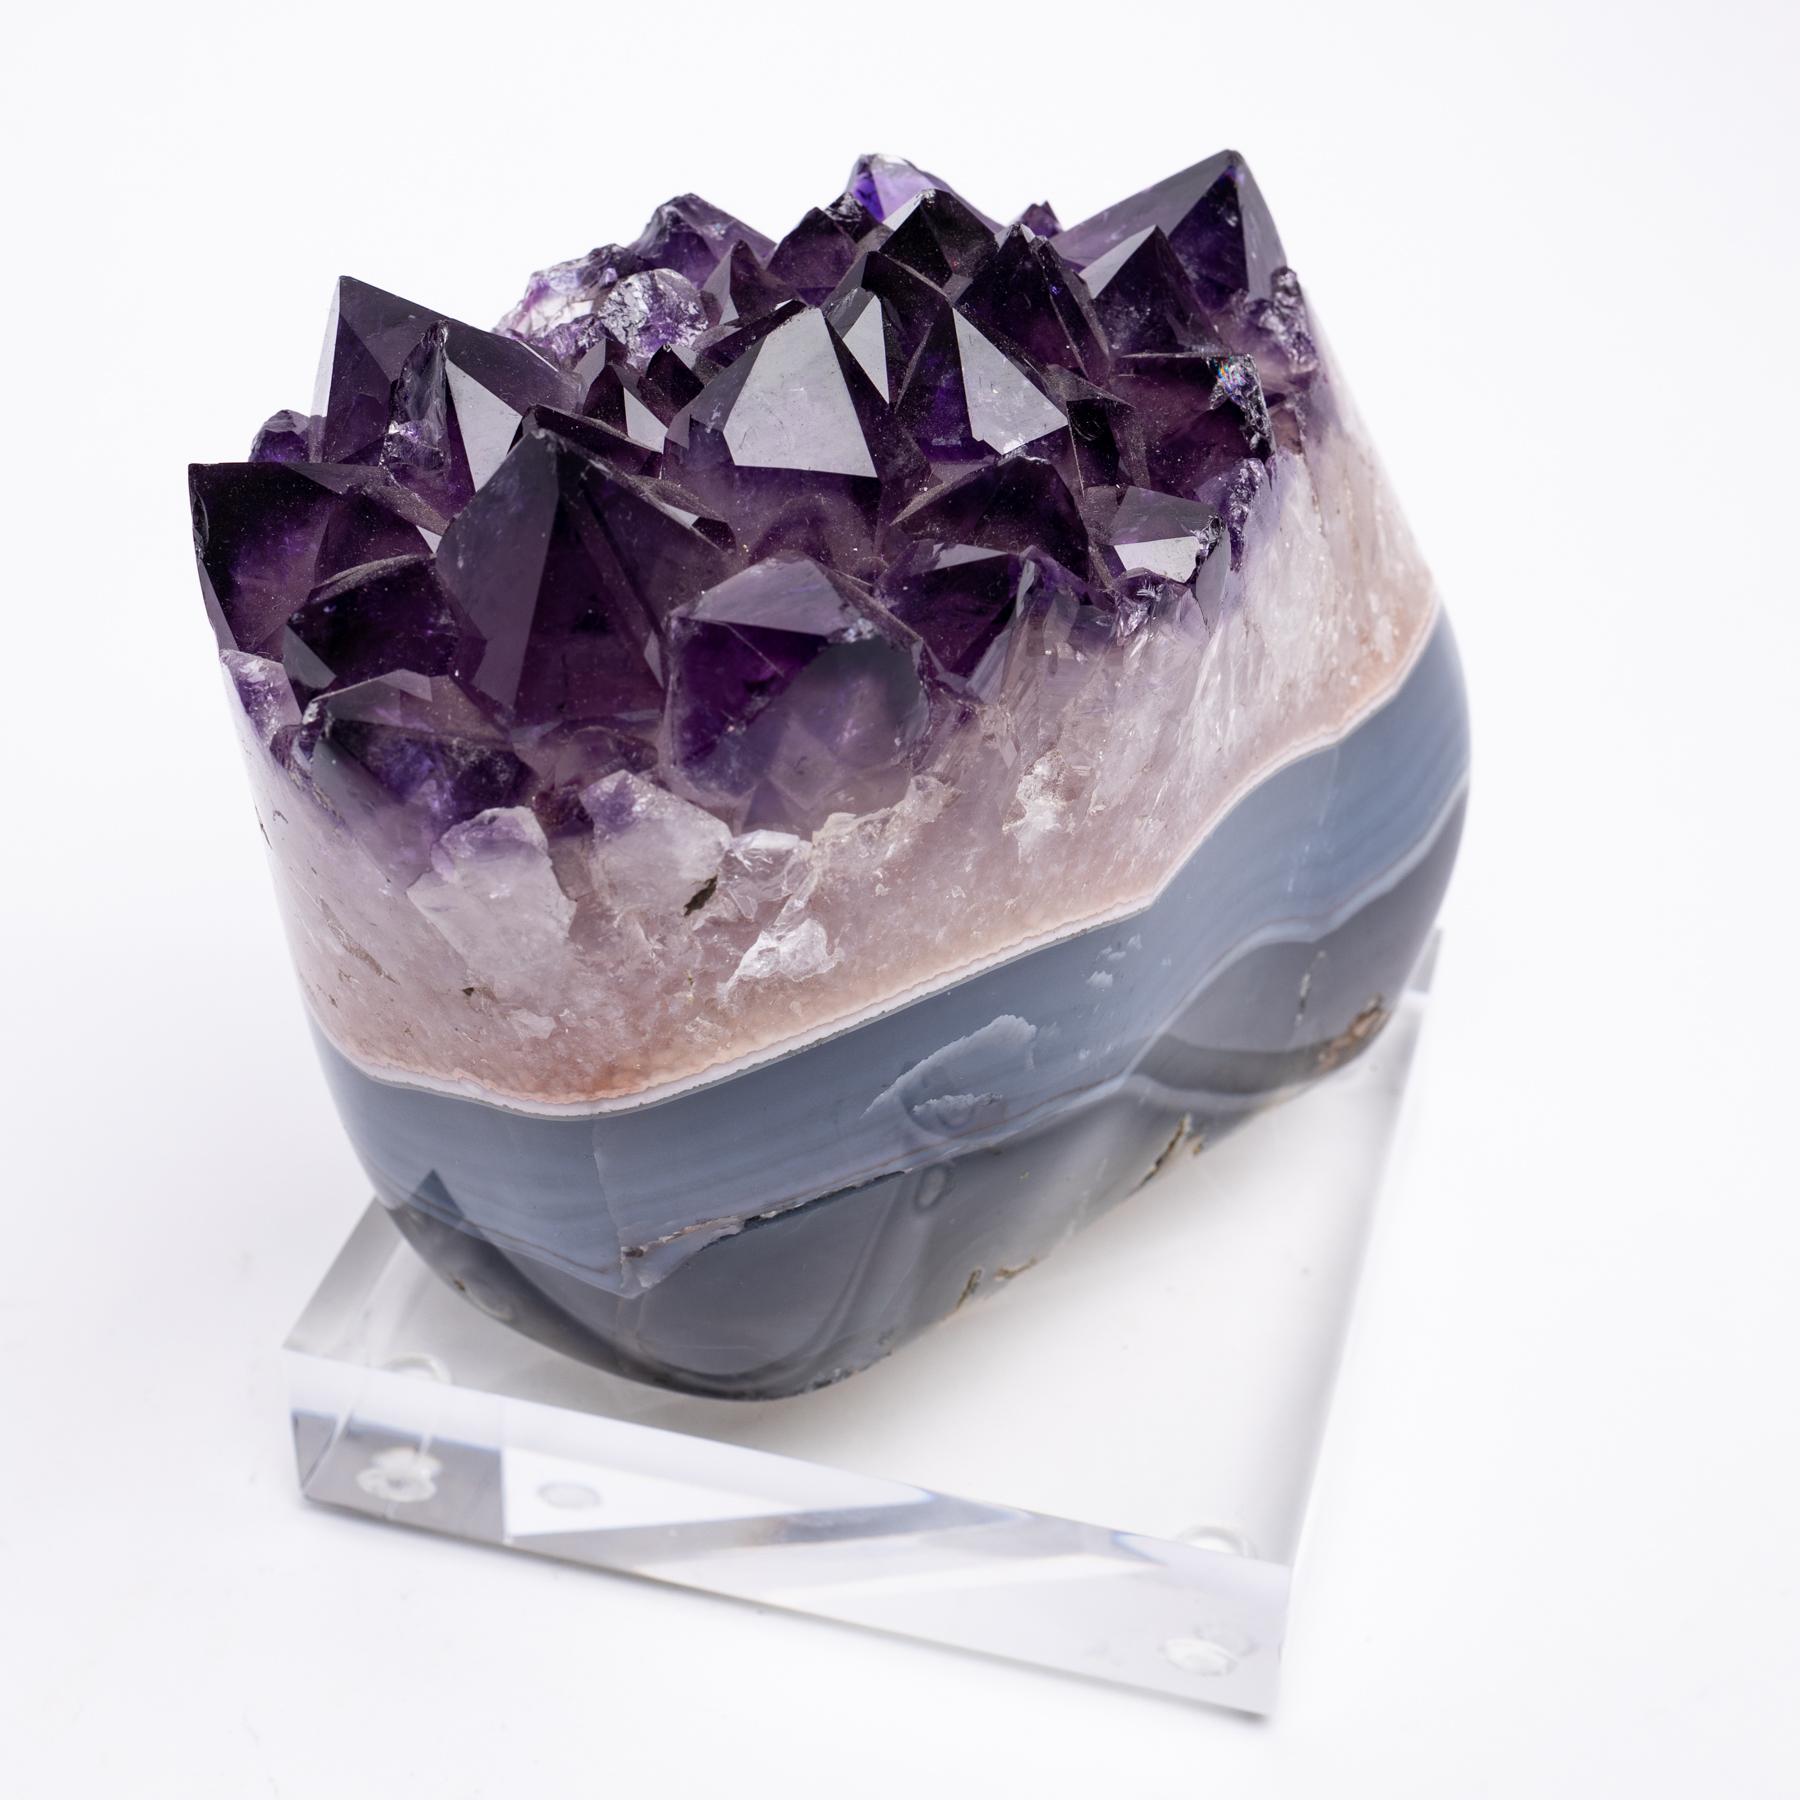 Mexican Uruguay Polished Agate with Amethysts Quartz Crystals Cluster on Acrylic Base